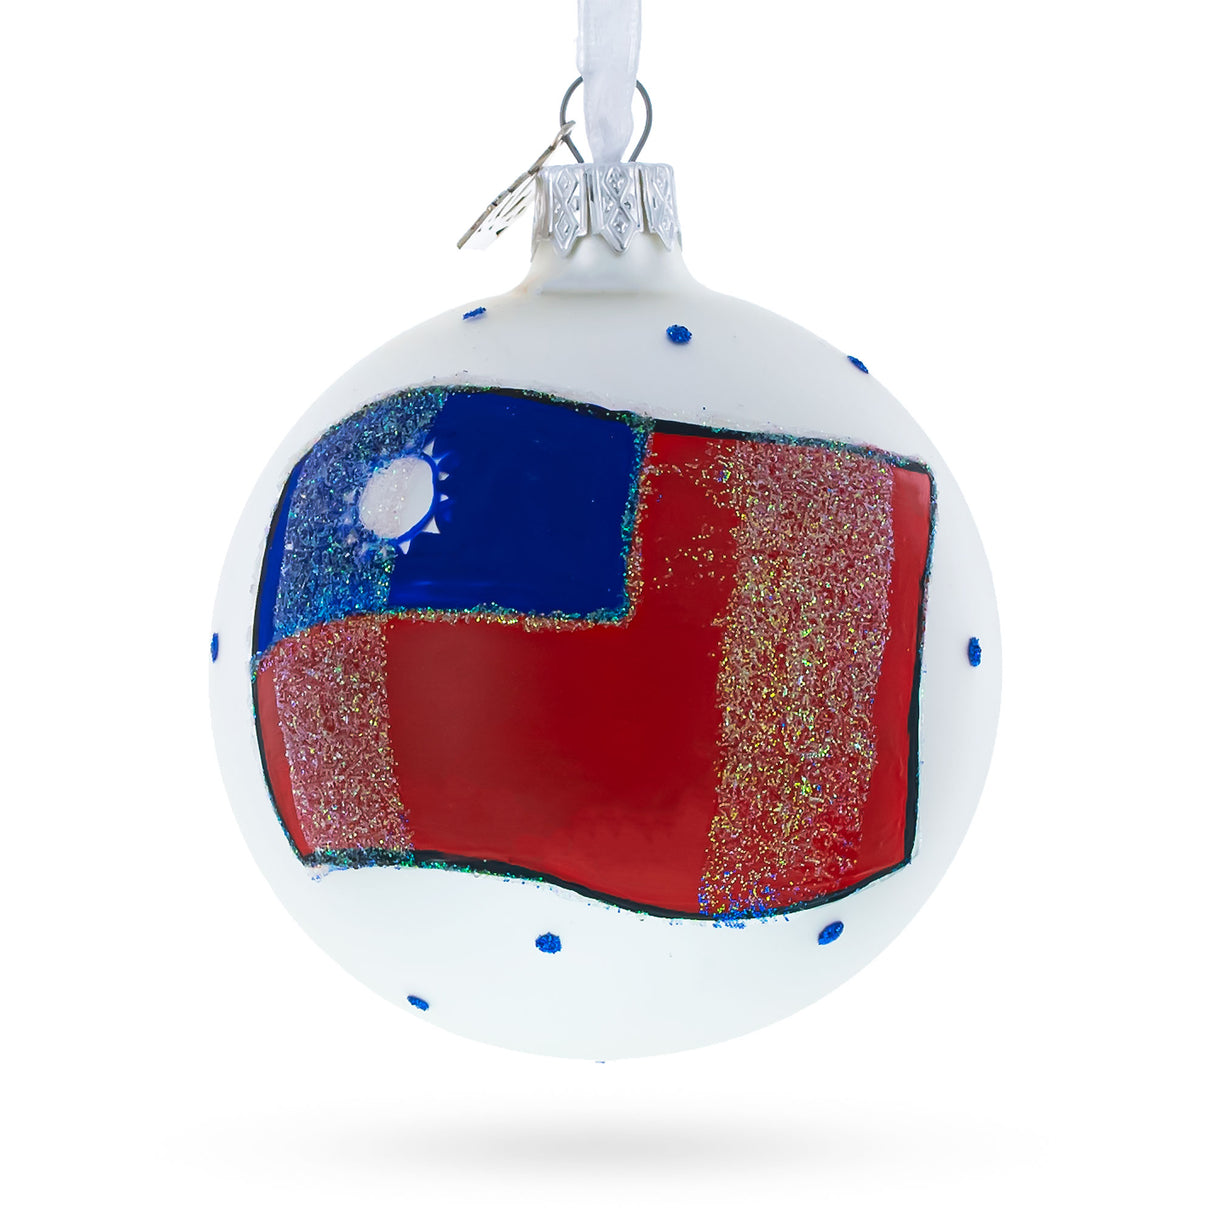 Taiwanese National Flag Blown Glass Ball Christmas Ornament 3.25 Inches in Multi color, Round shape